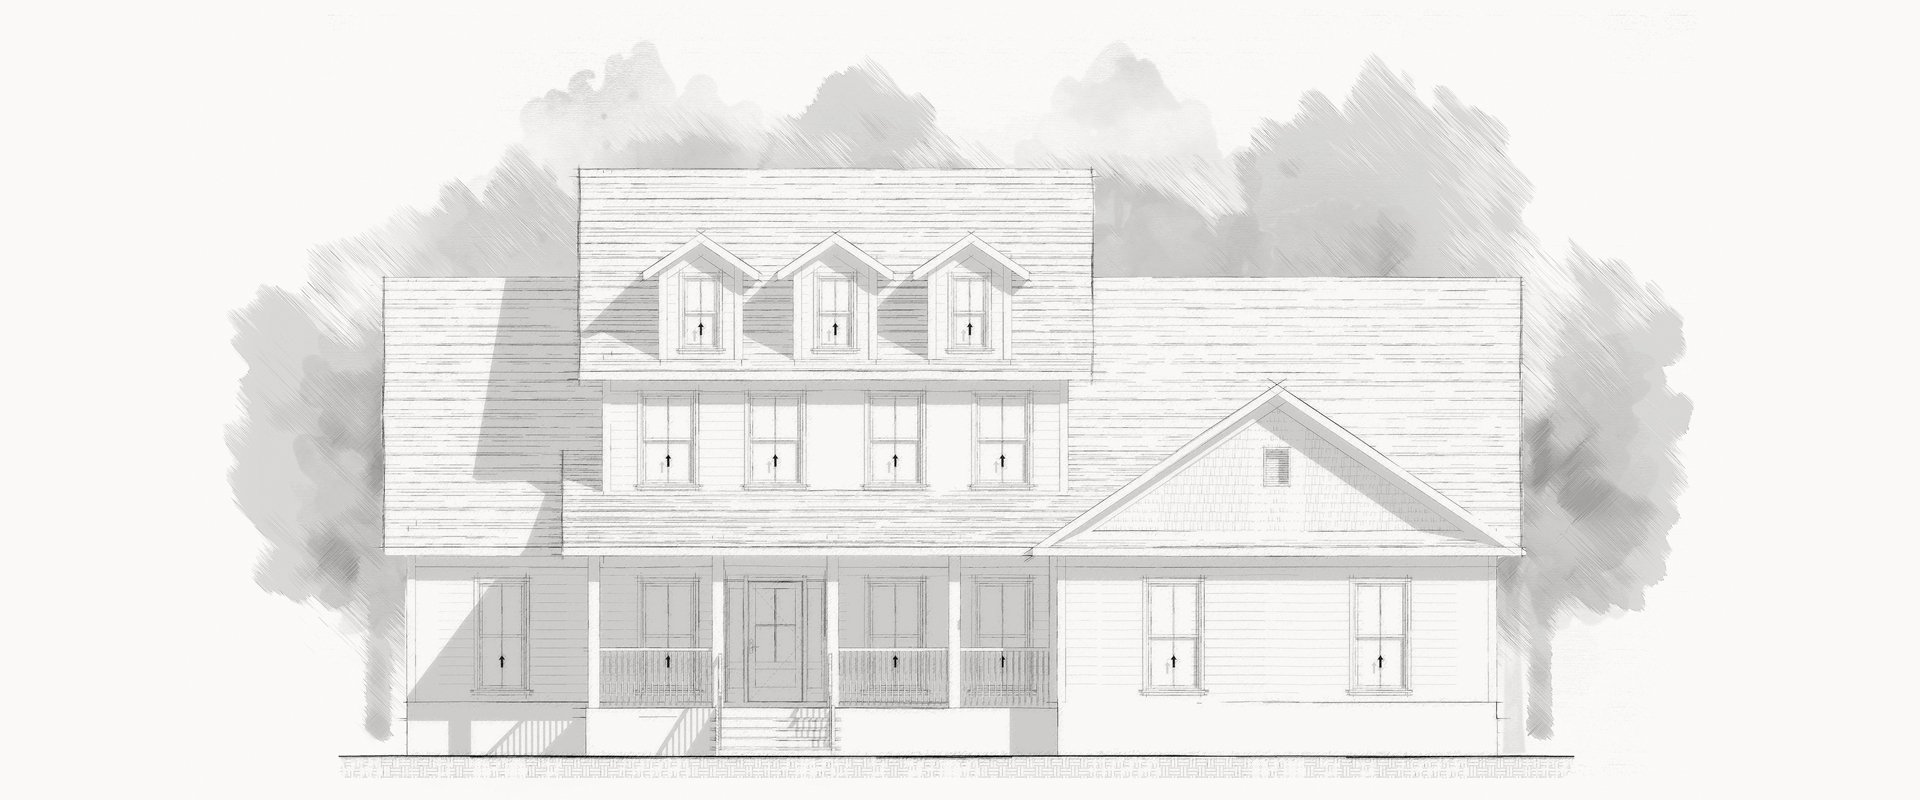 Blythe Custom Homes' Brennan model features 5 BR, 4.5 BA and 3,184 finished sf